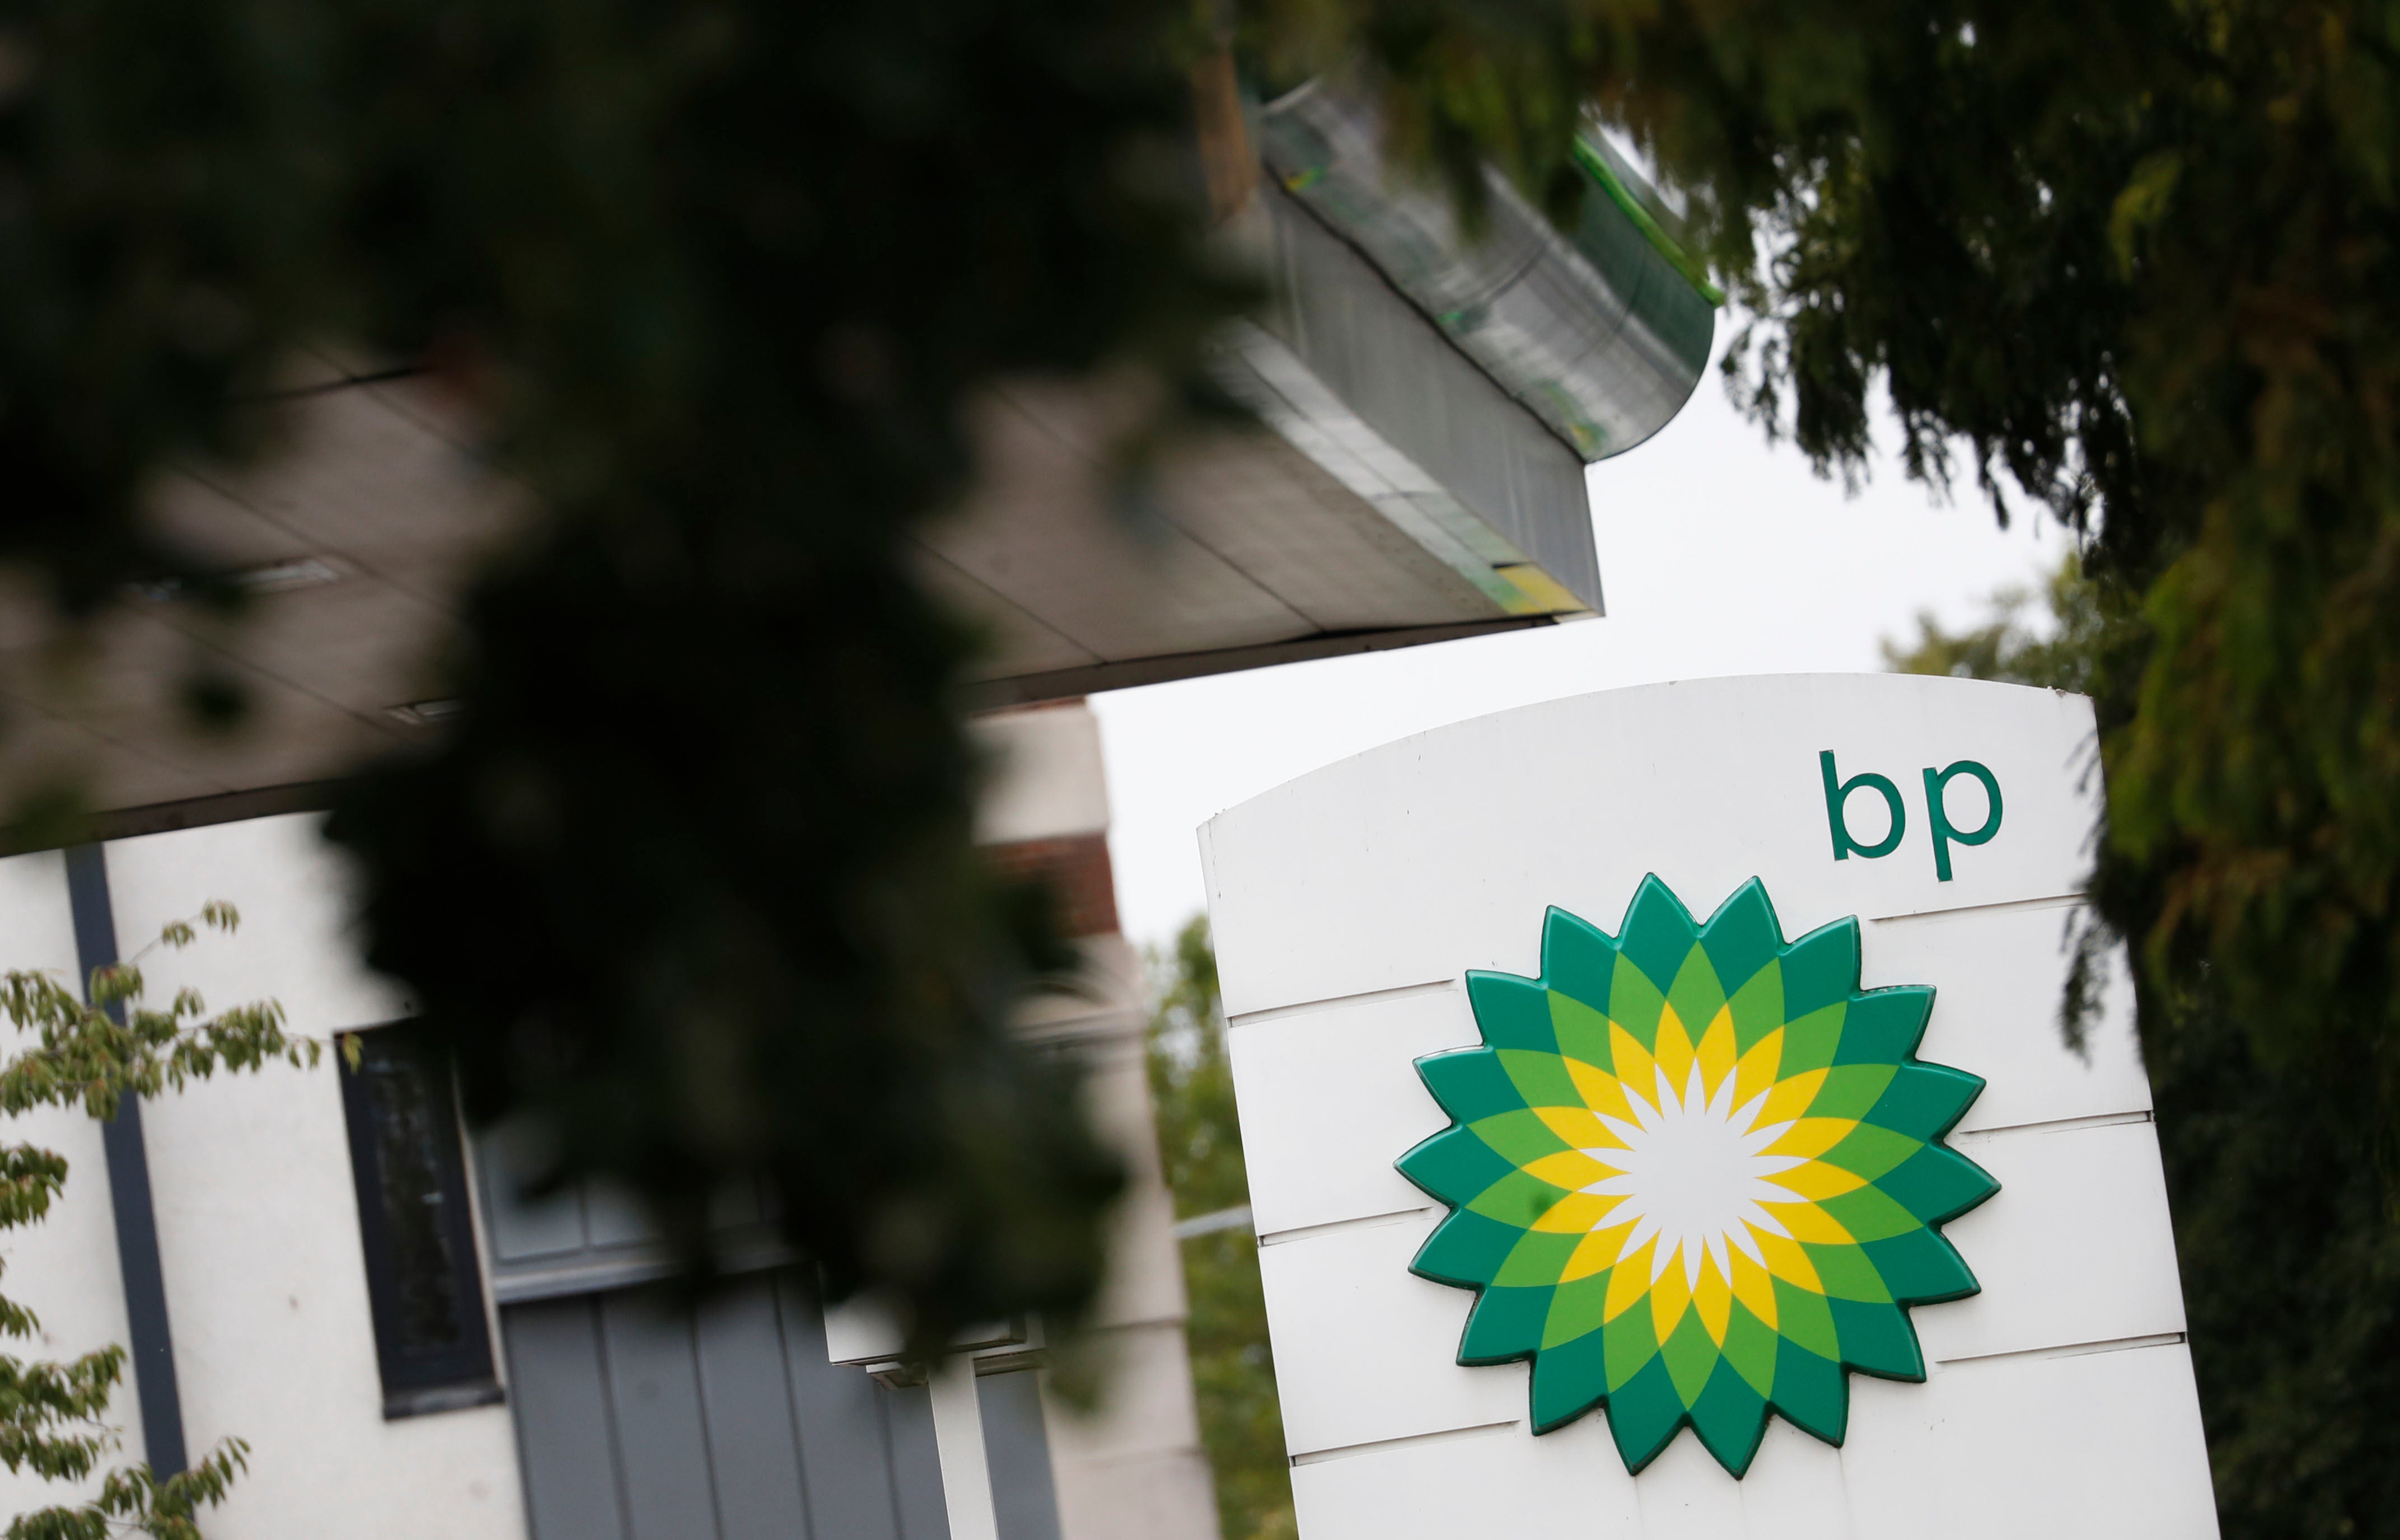 BP reported underlying profit of $3.3bn for its third quarter